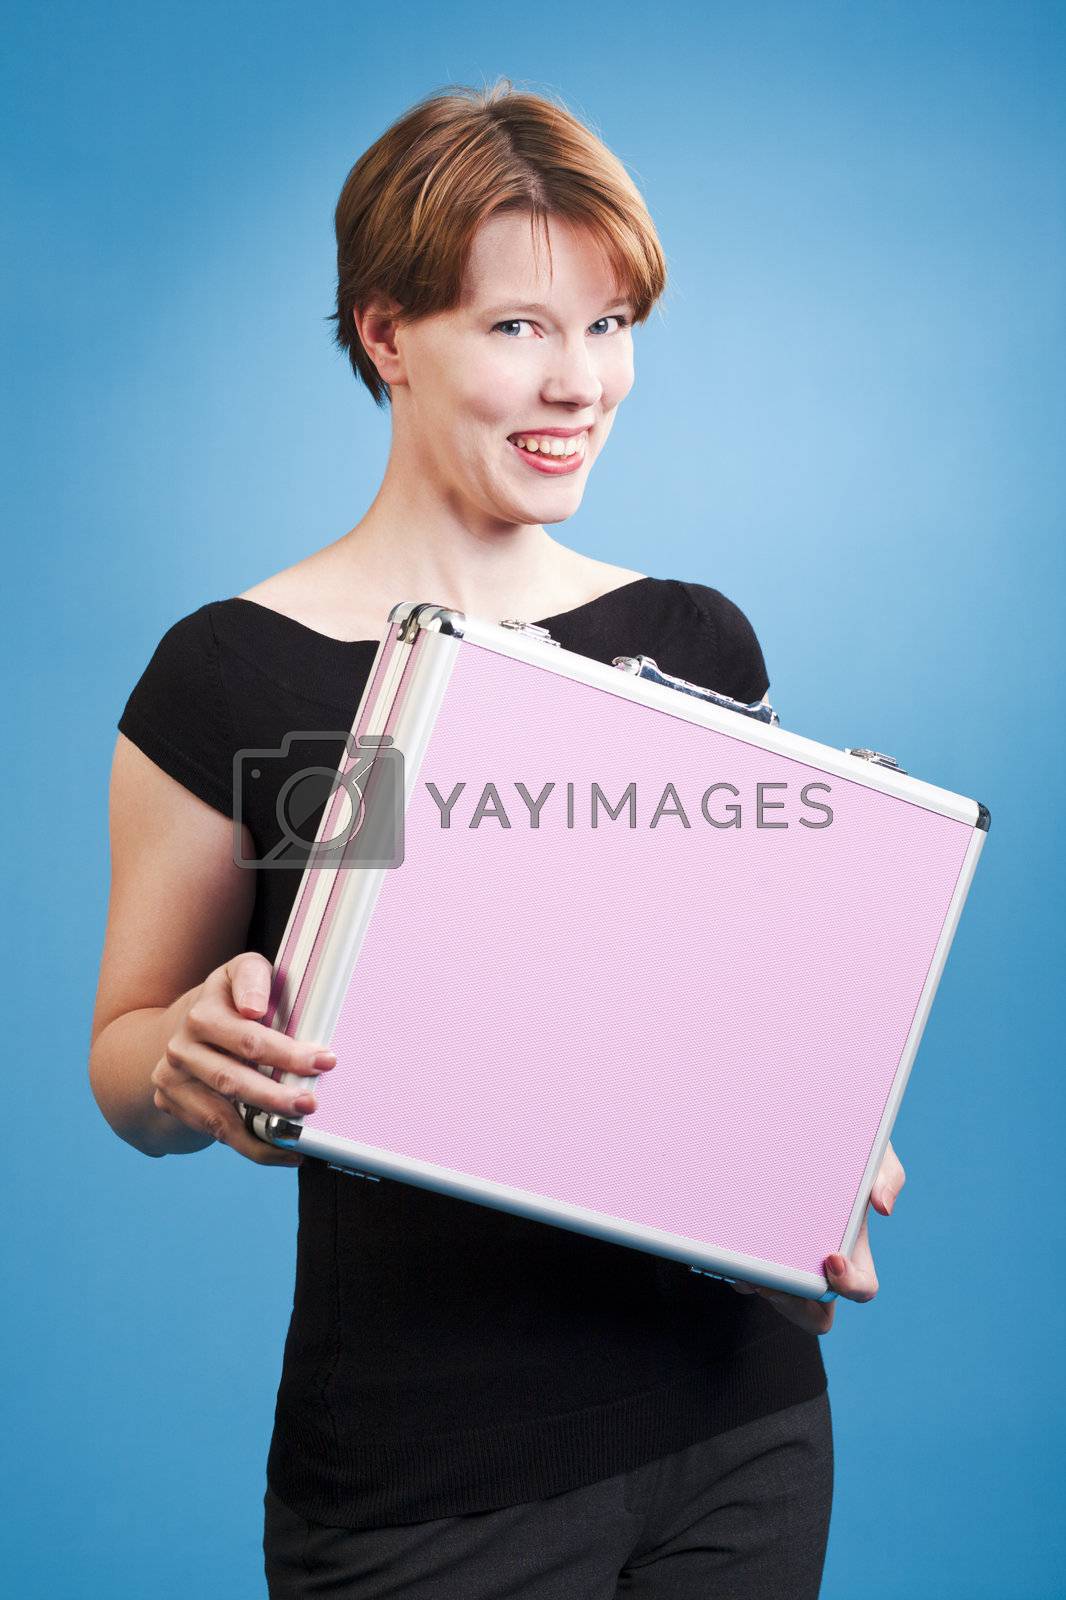 Royalty free image of Woman at work by mjp